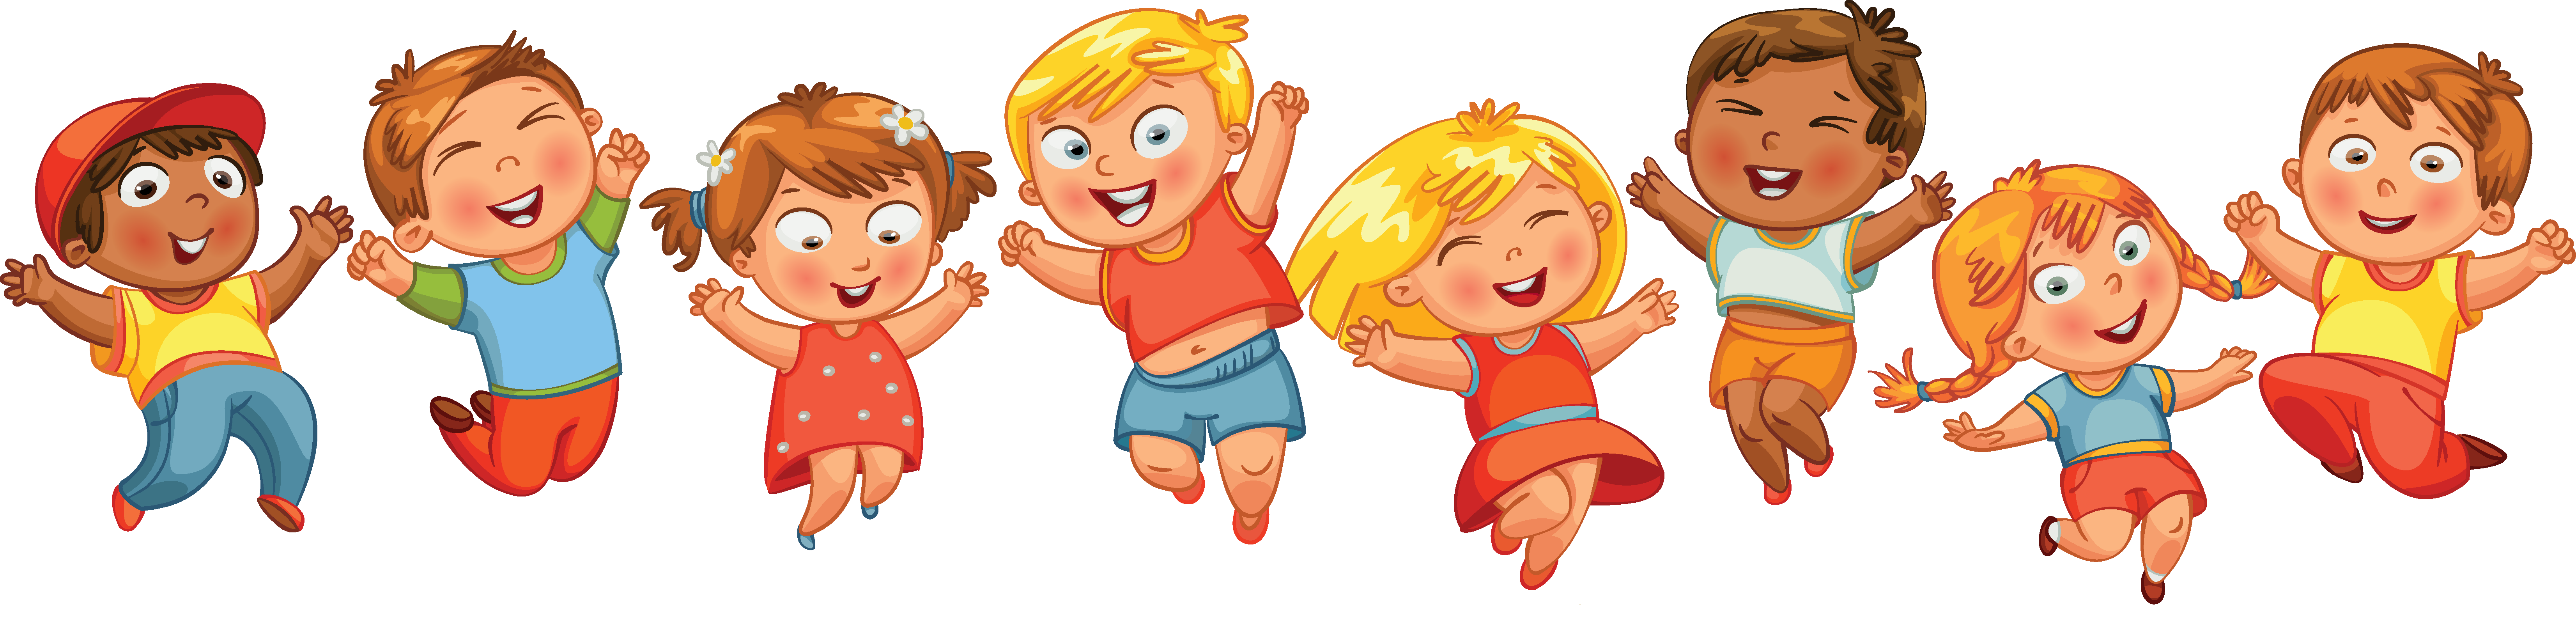 Kids Group Wish Greeting Diwas Children'S Of Clipart